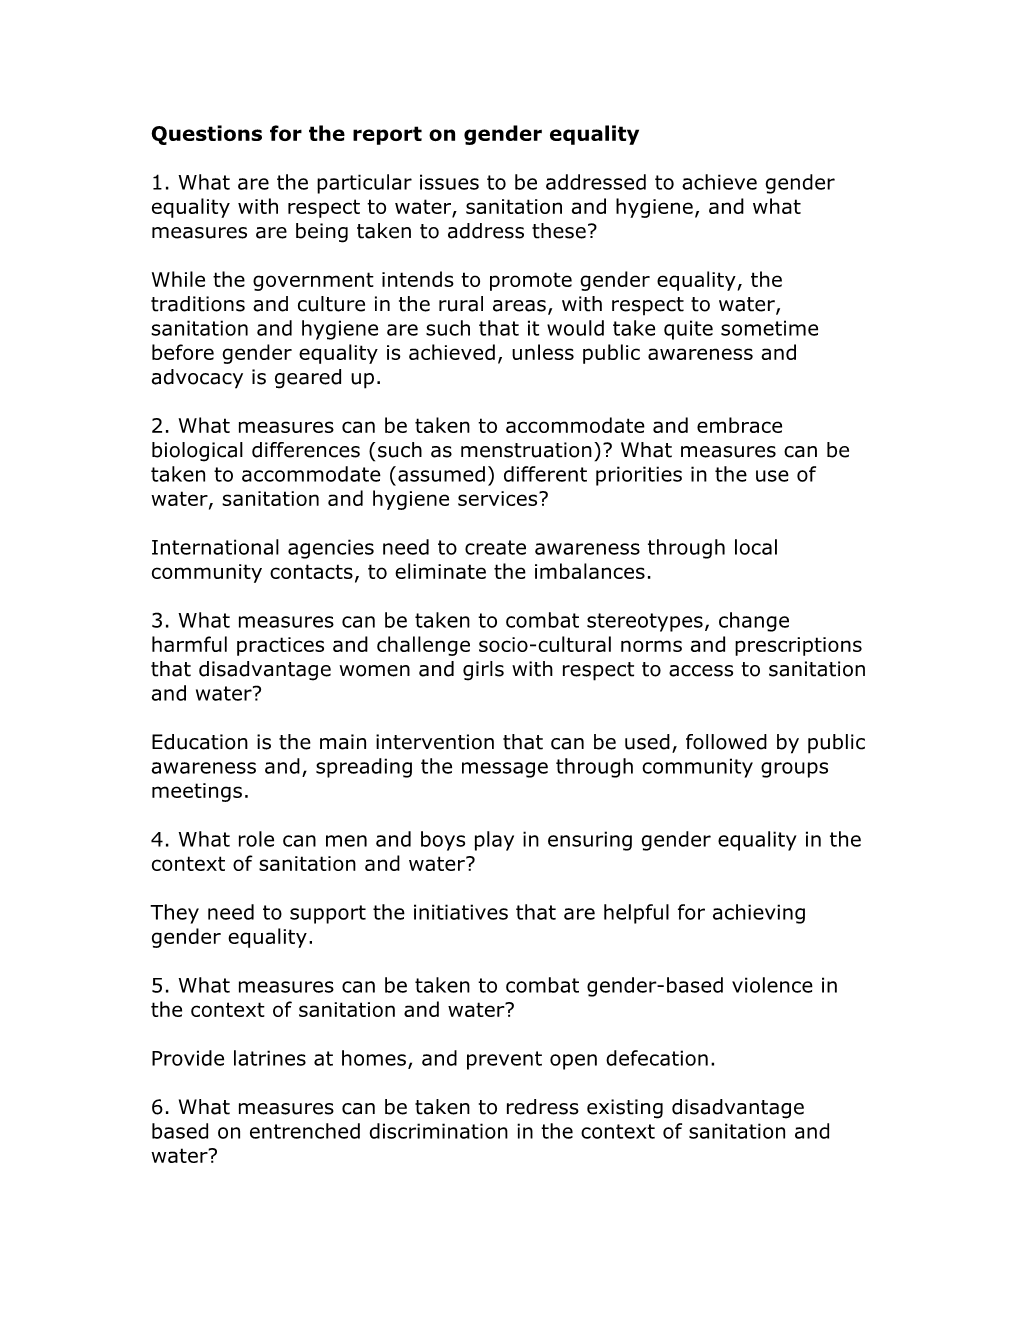 Questions for the Report on Gender Equality